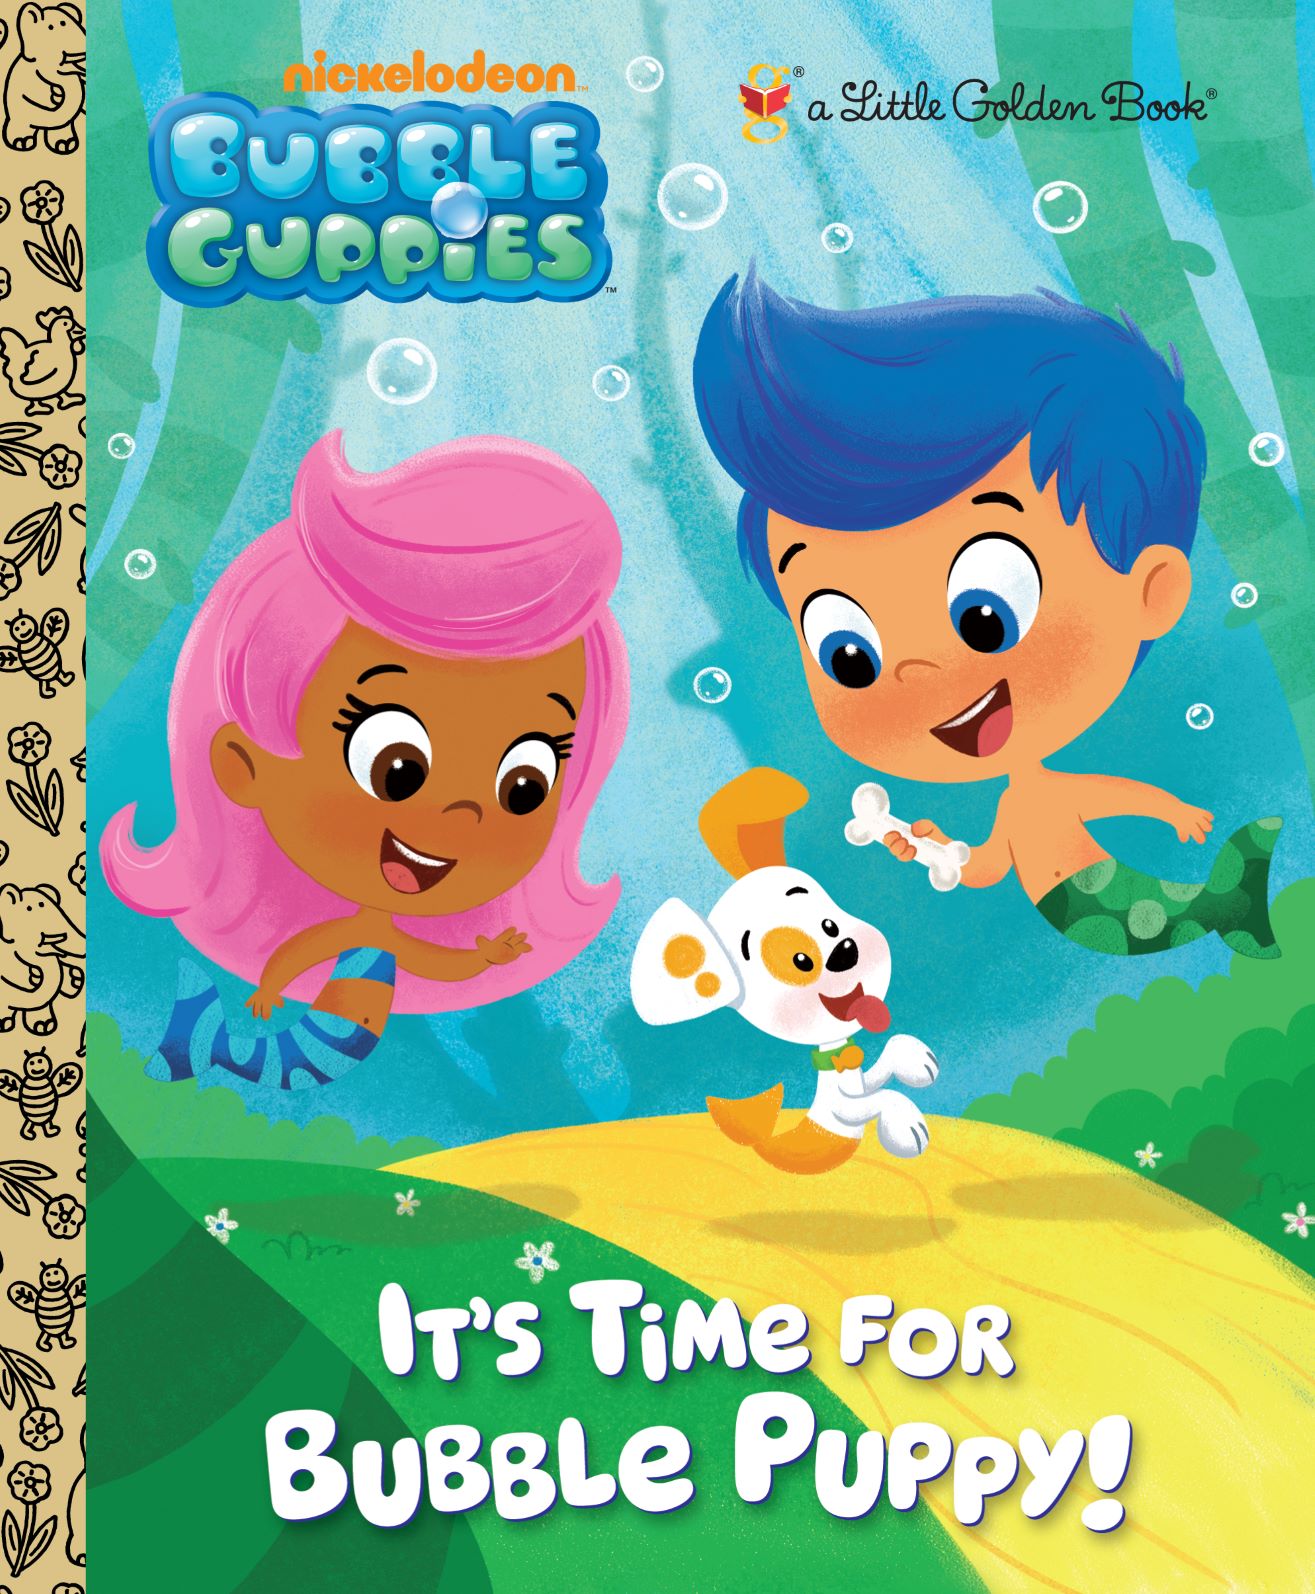 Bubble Guppies It's Time for Bubble Puppy! Golden Book